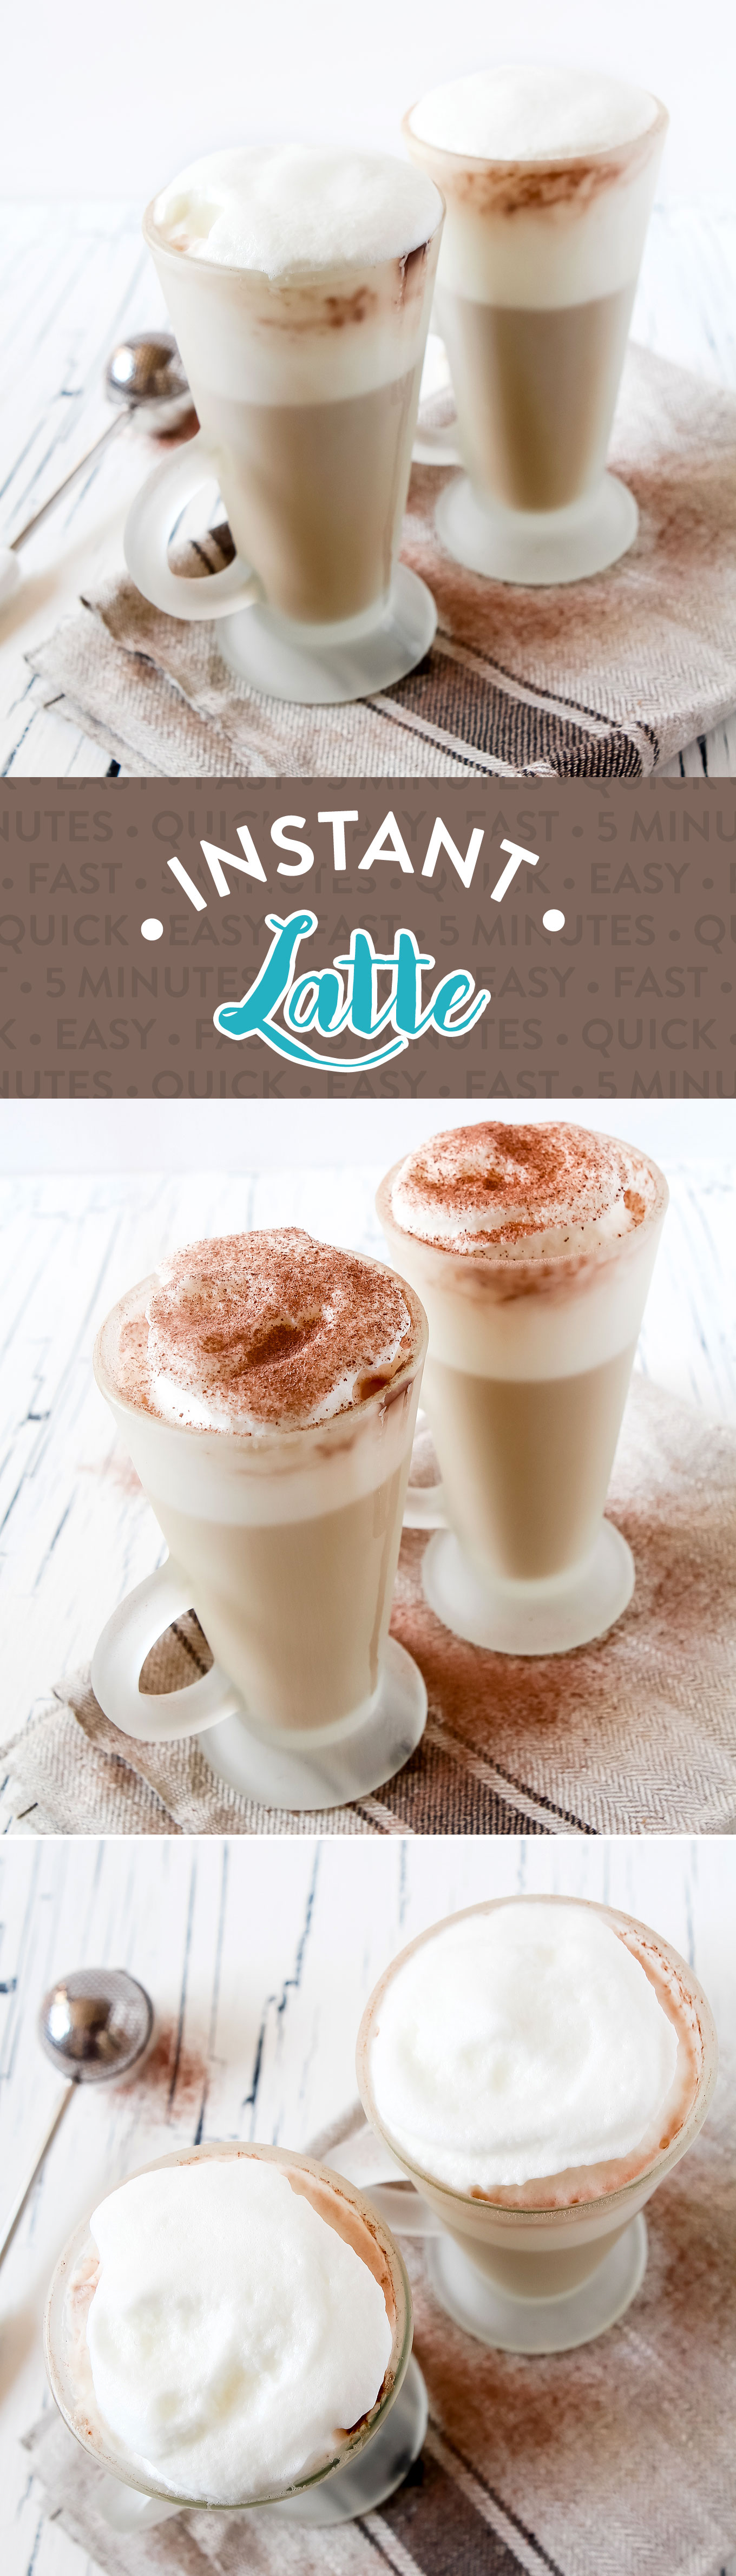 Coffee Shop Style Homemade Instant Latte Recipe by Sweet2EatBaking.com | No need to nip to the shop for your latte fix! This instant latte is made in minutes with 2-3 ingredients, has a delicious flavour and foamed milk!